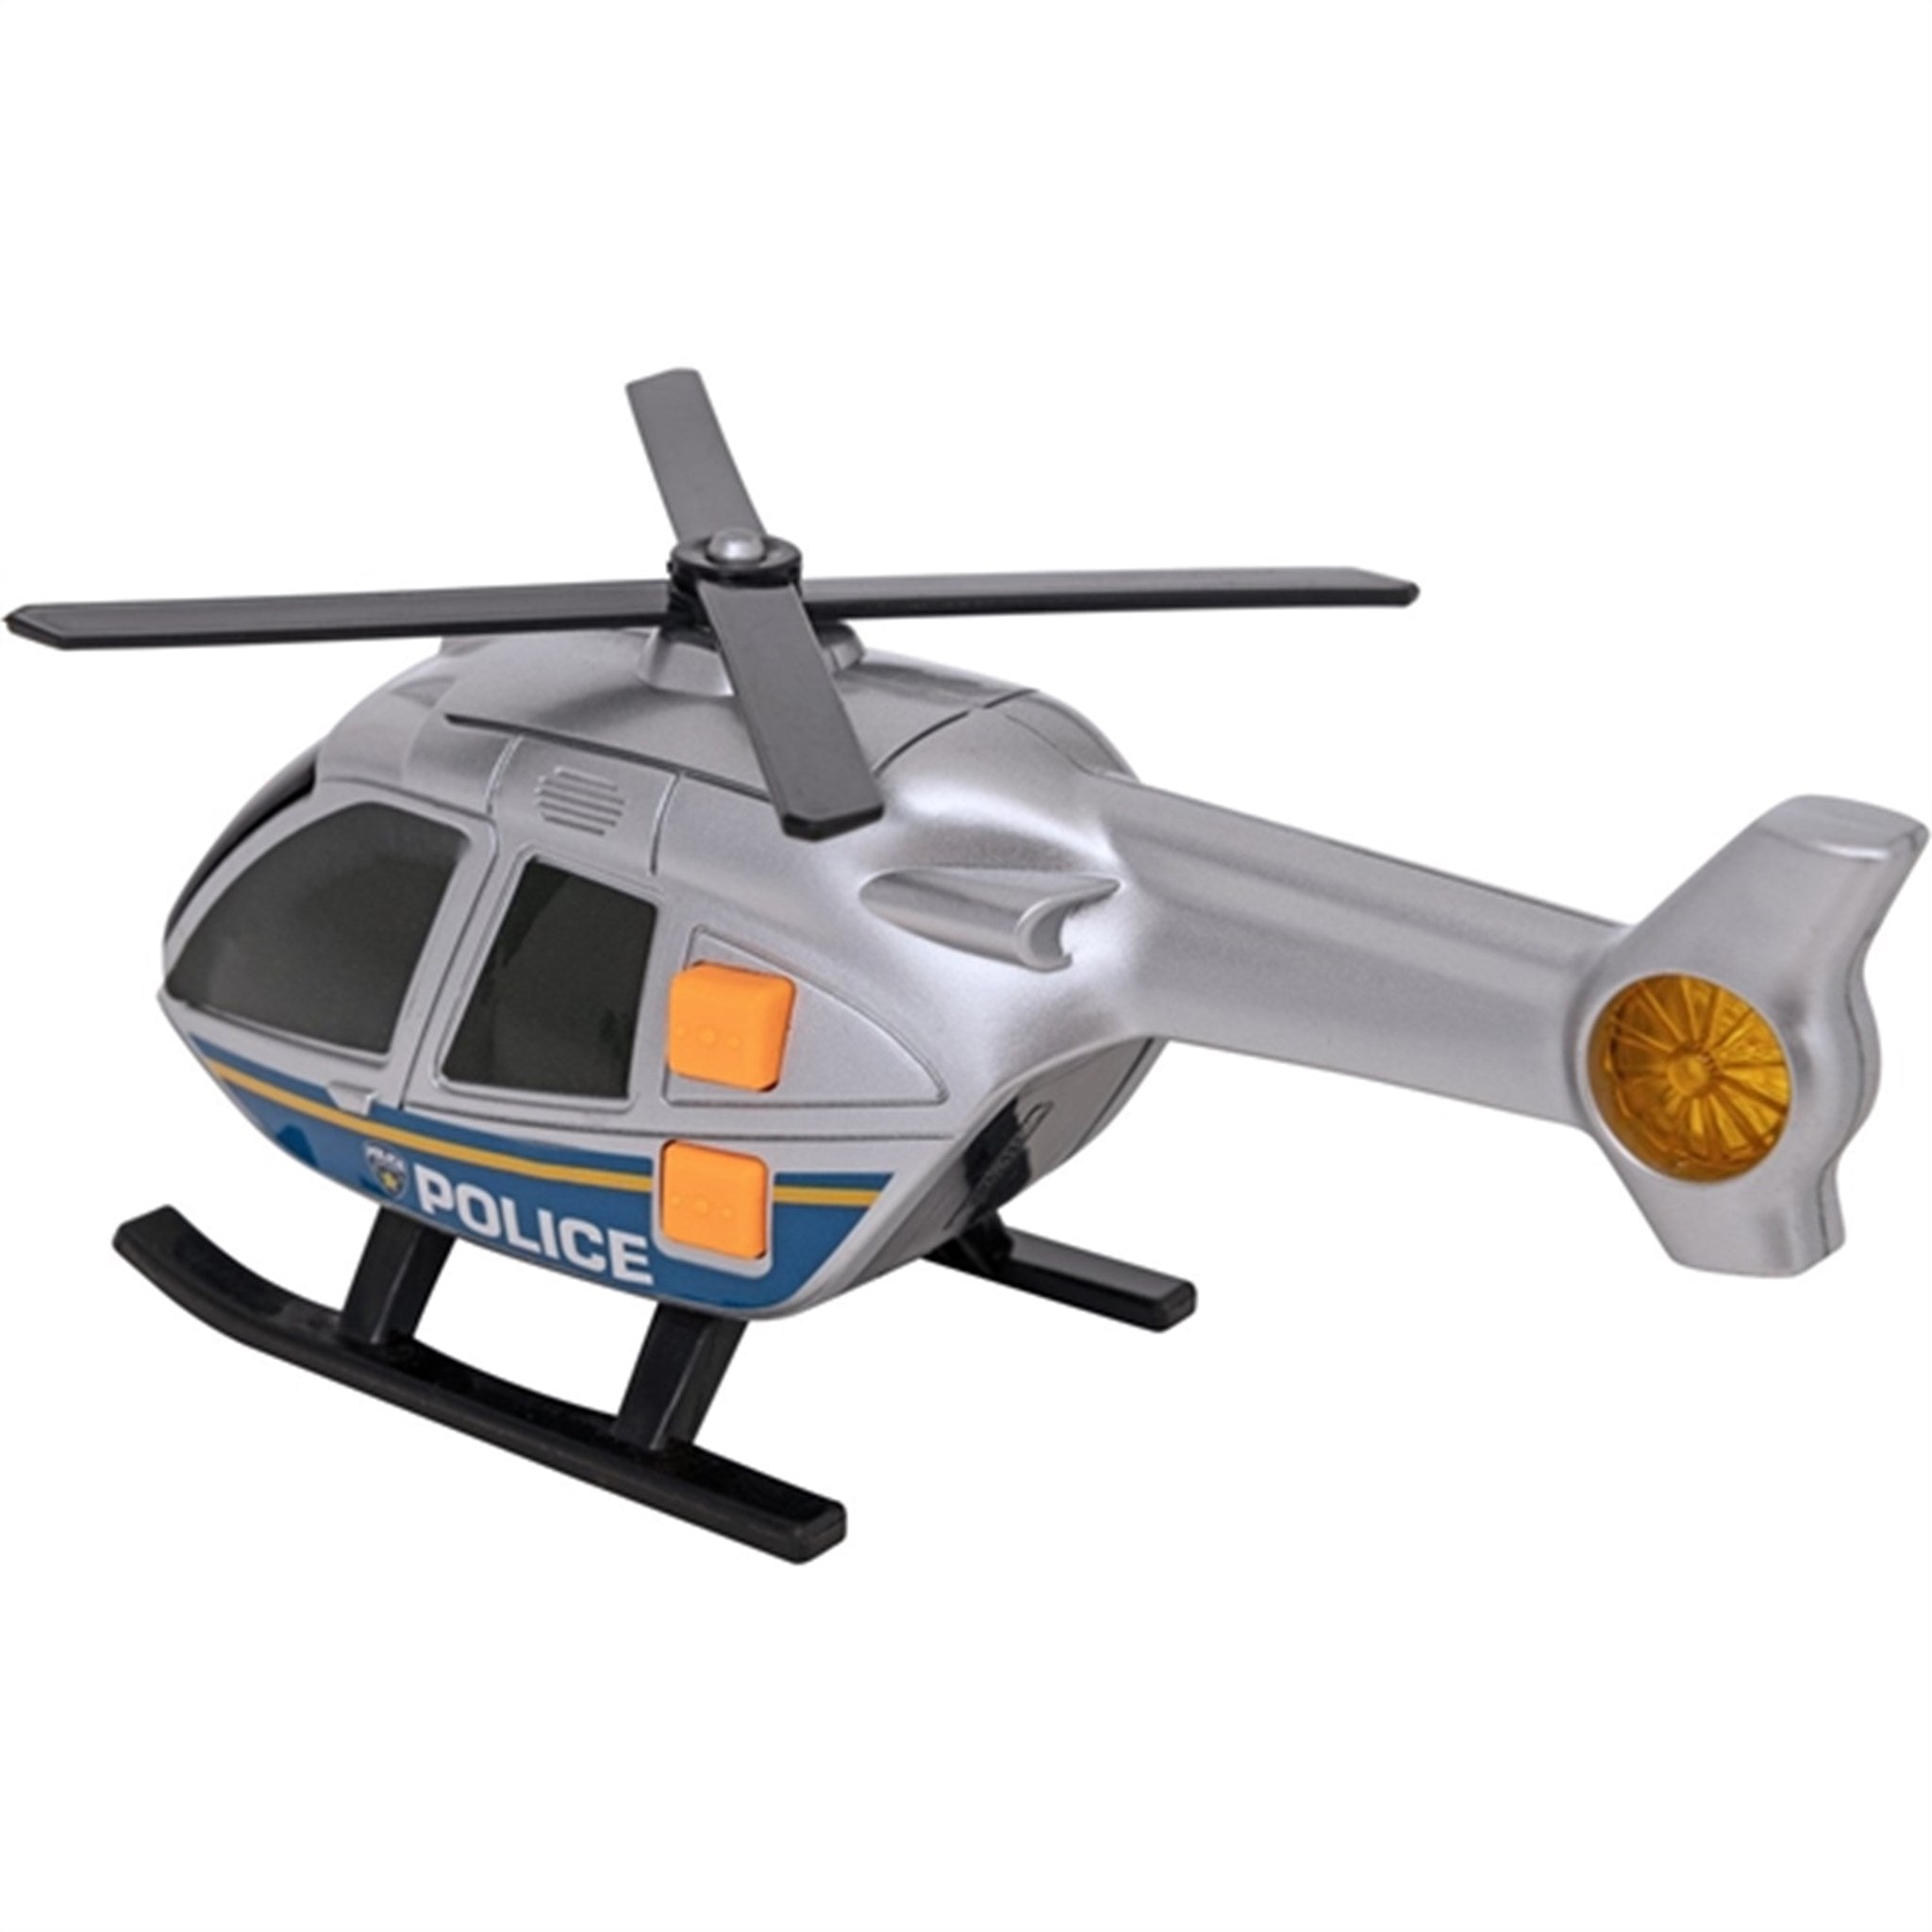 Teamsterz Small L&S Helicopter 5